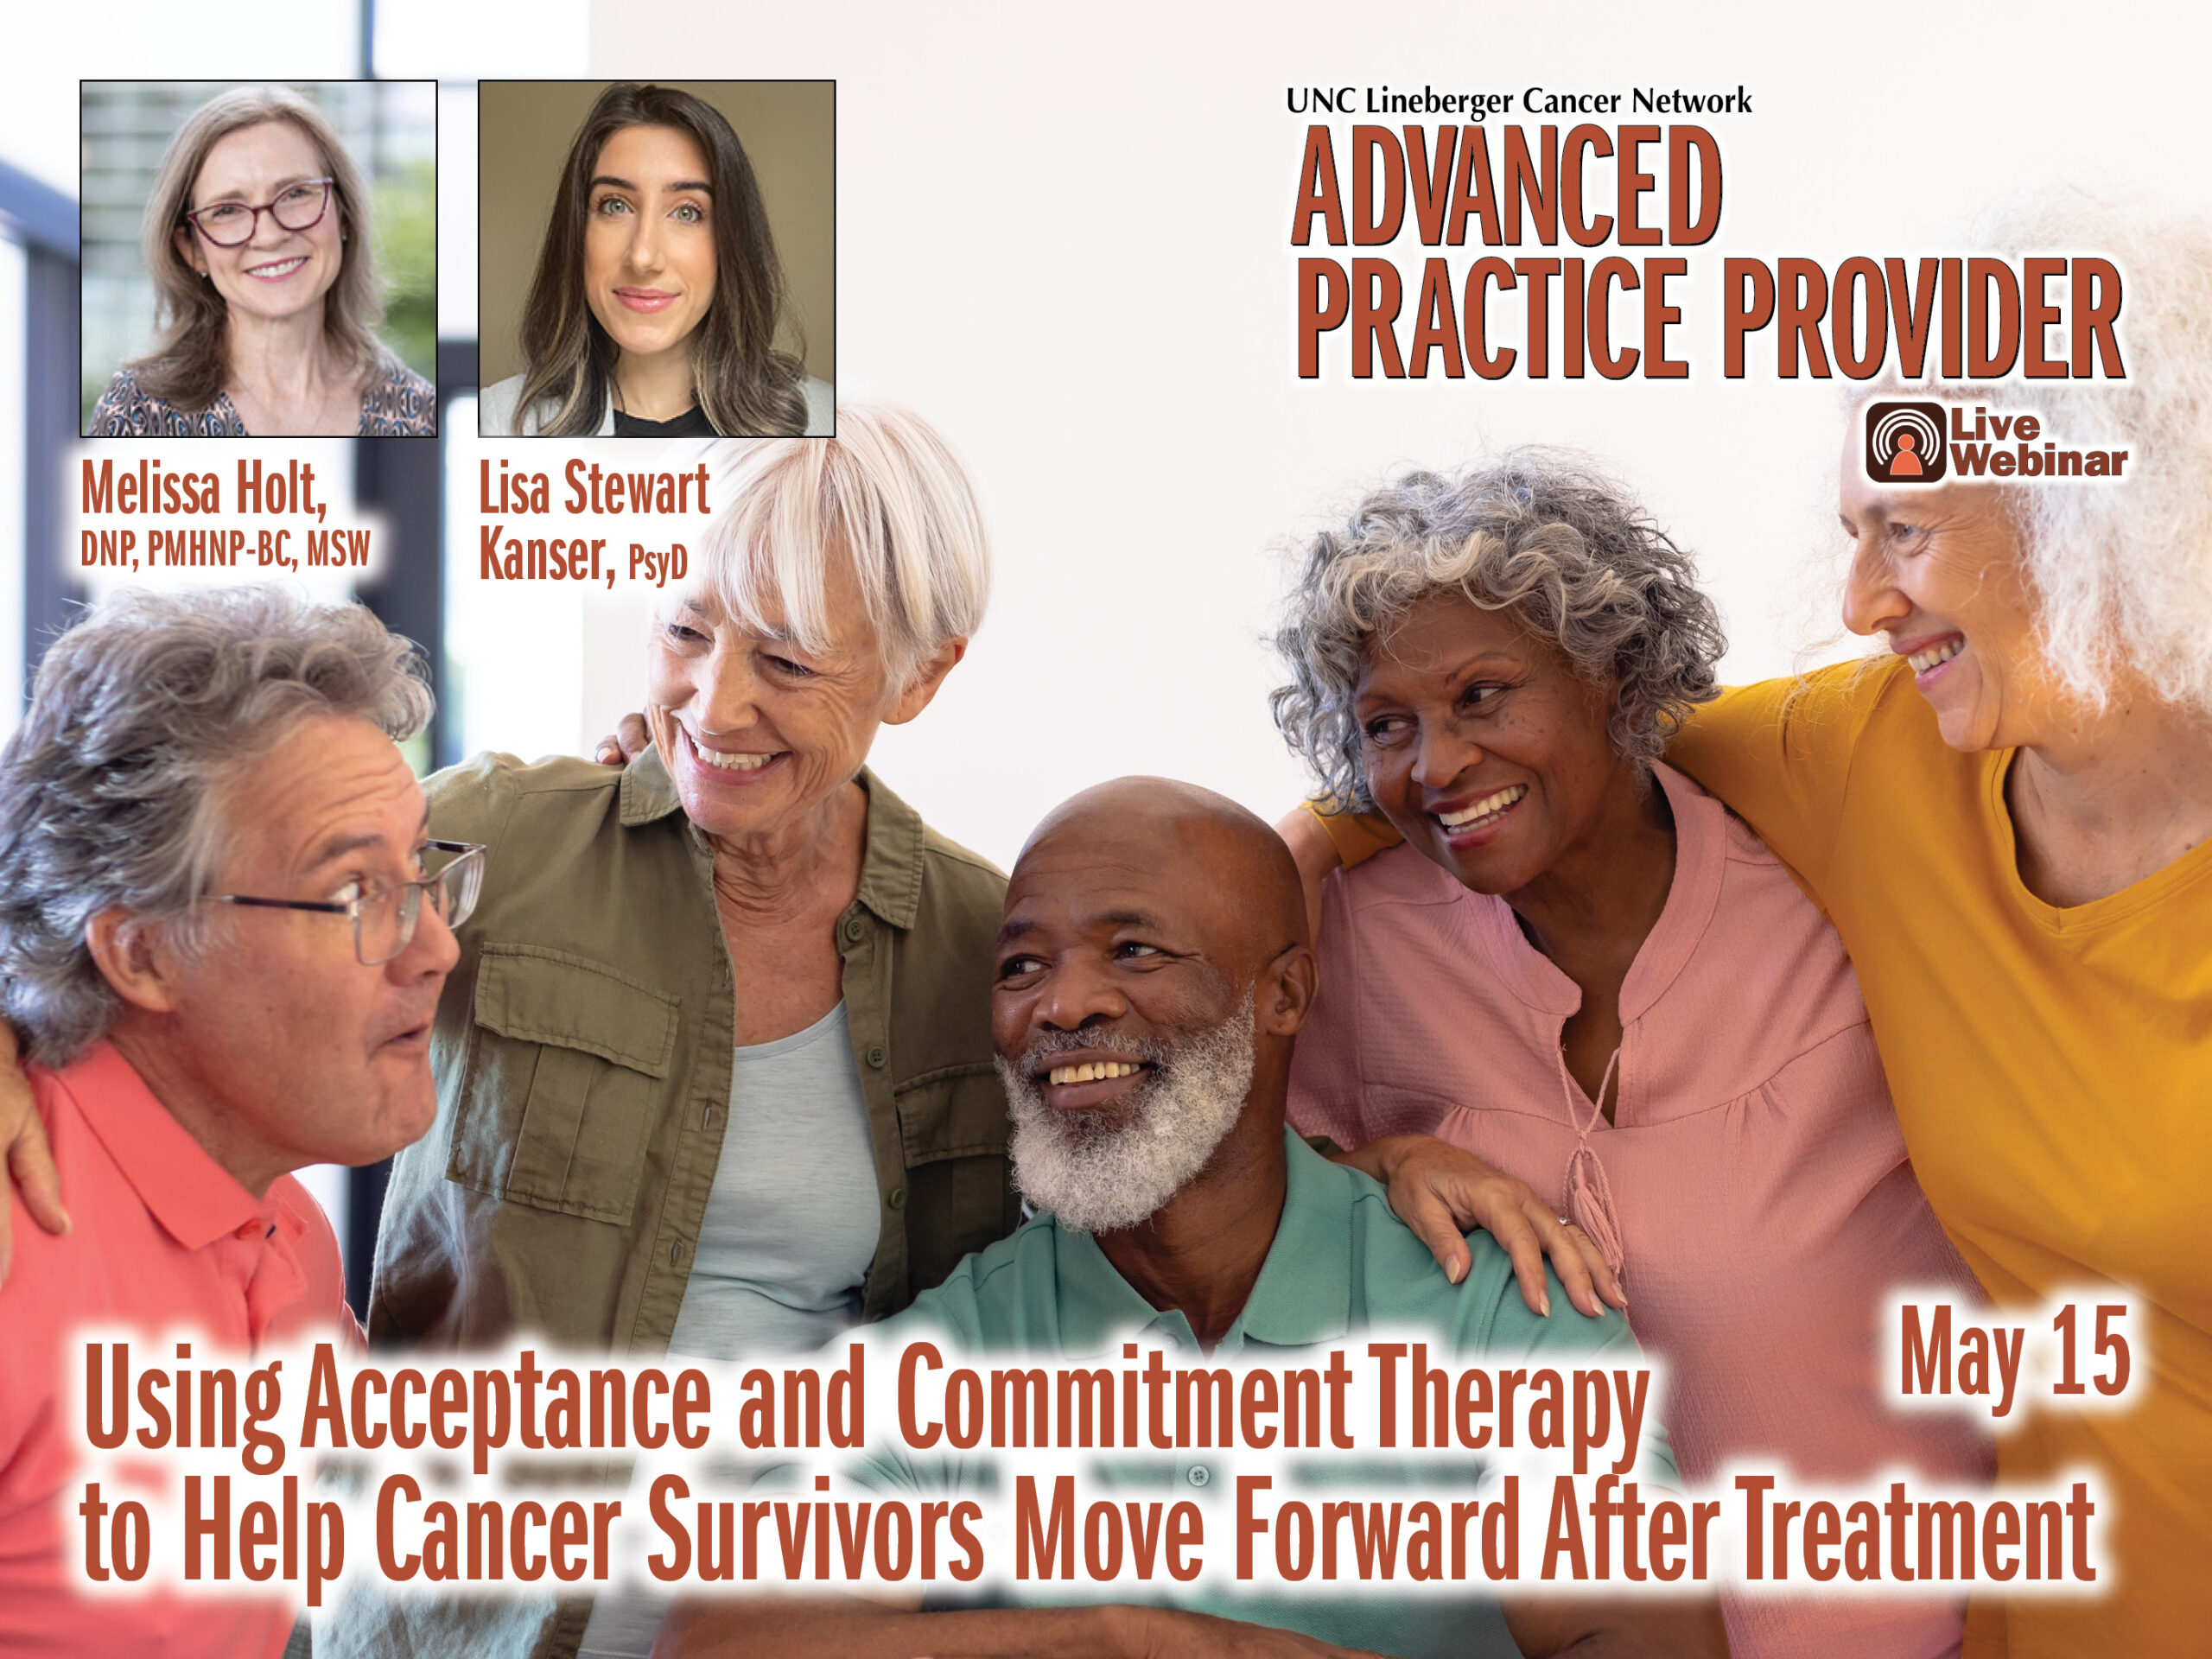 Using Acceptance and Commitment Therapy (ACT) to Help Cancer Survivors Move Forward After Treatment